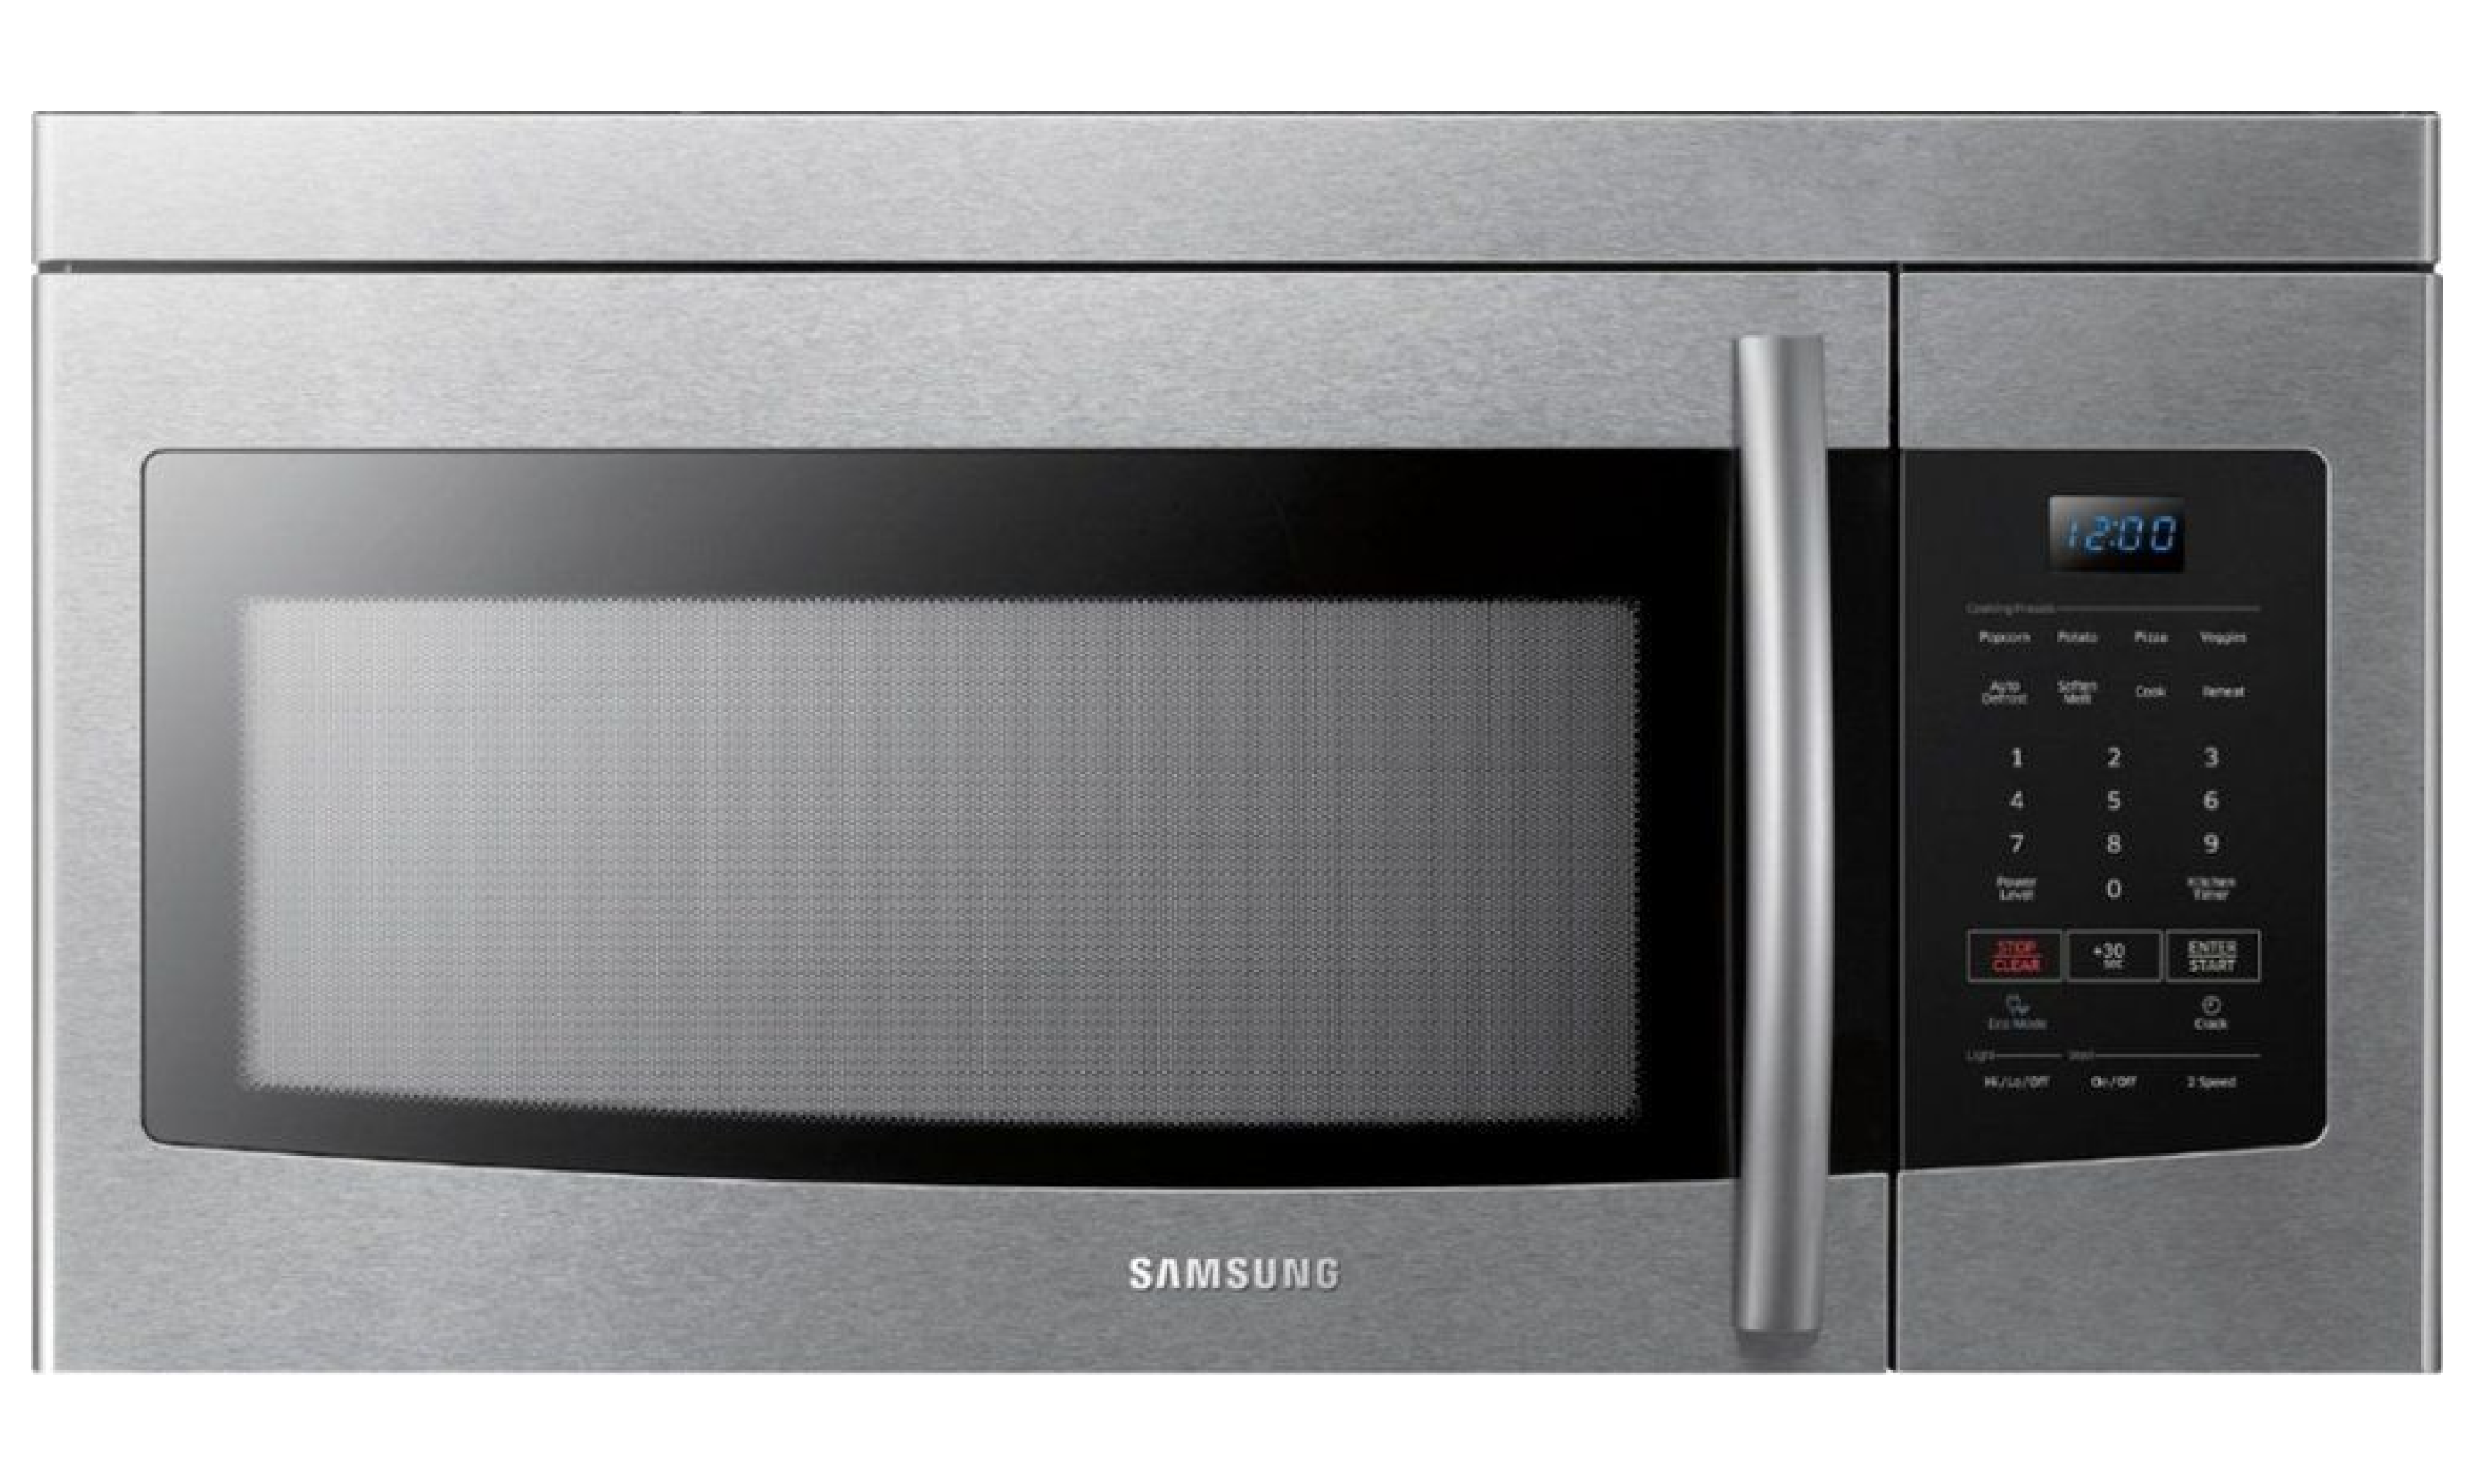 Samsung 1.6 Cu. Ft. Over-the-Range Microwave - Stainless steel - ME16K3000AS